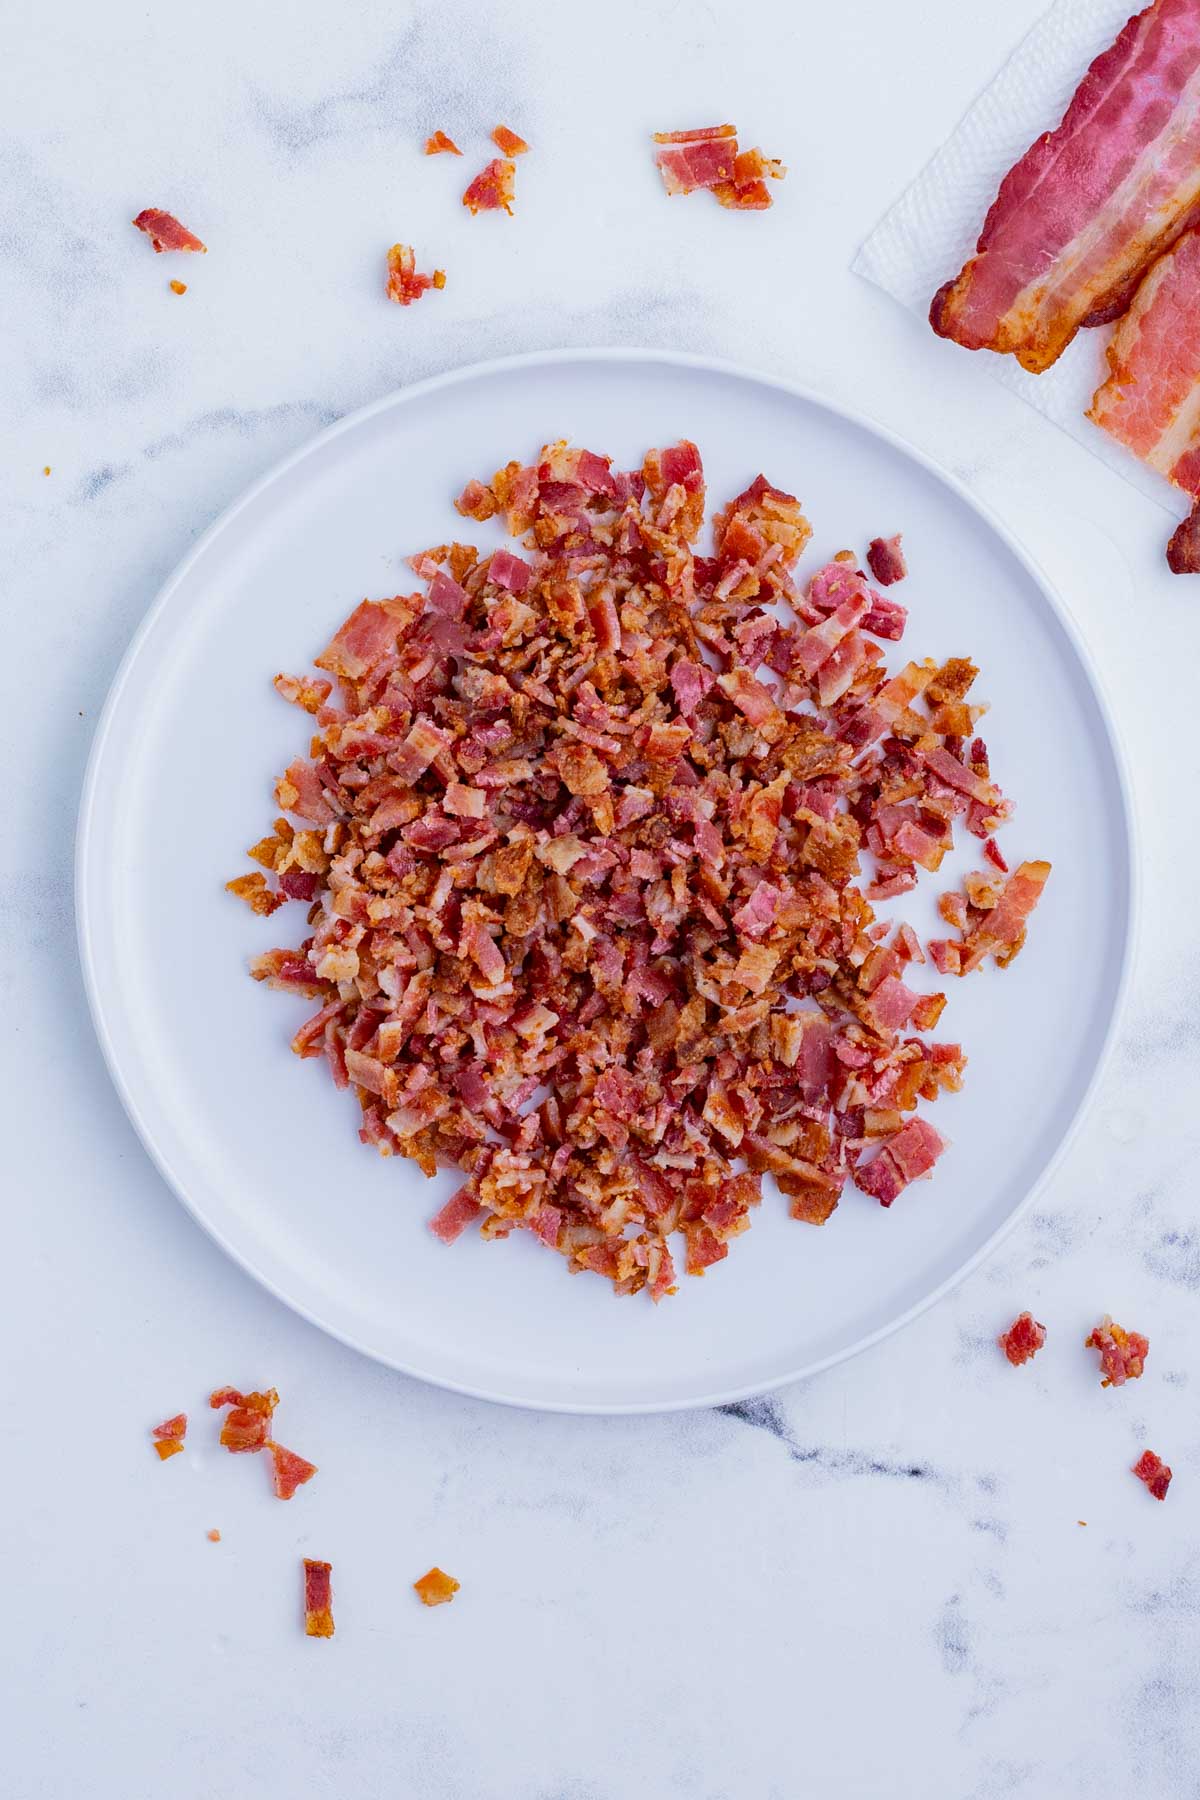 A plate full of chopped bacon pieces is ready to use.